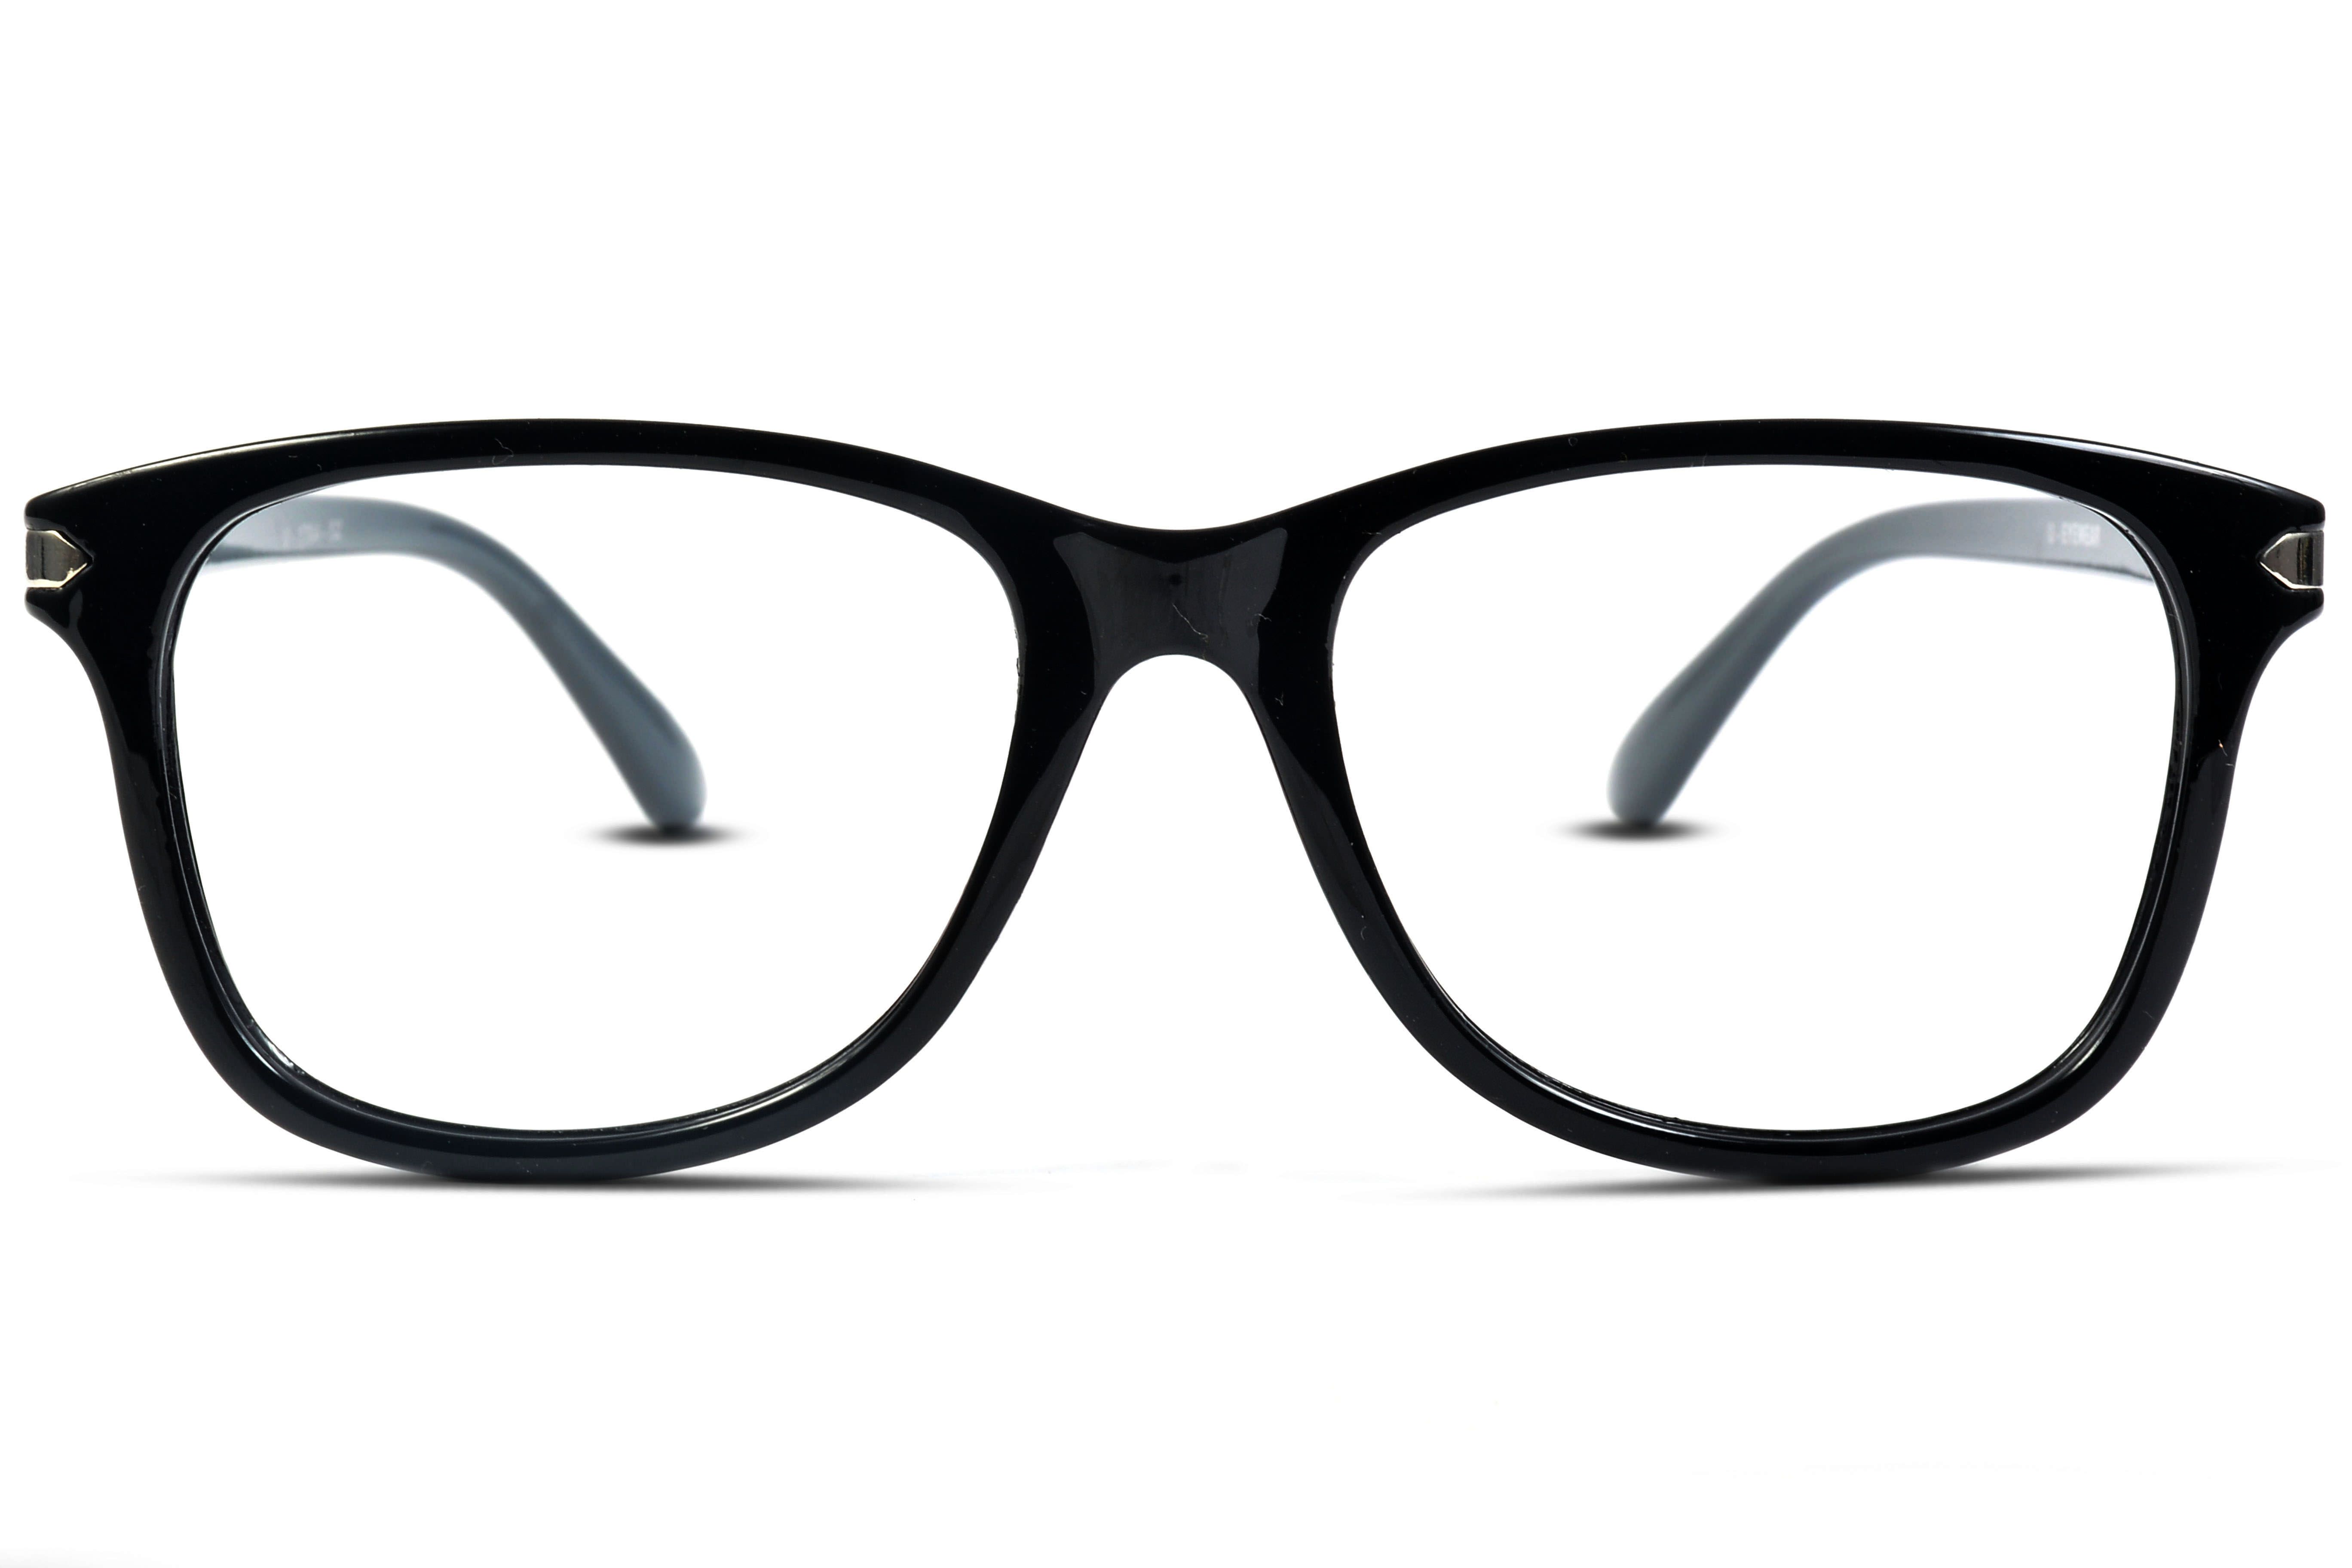 Reactr Square Spectacle Frame Buy Reactr Square Spectacle Frame Eyewearlabs 4737